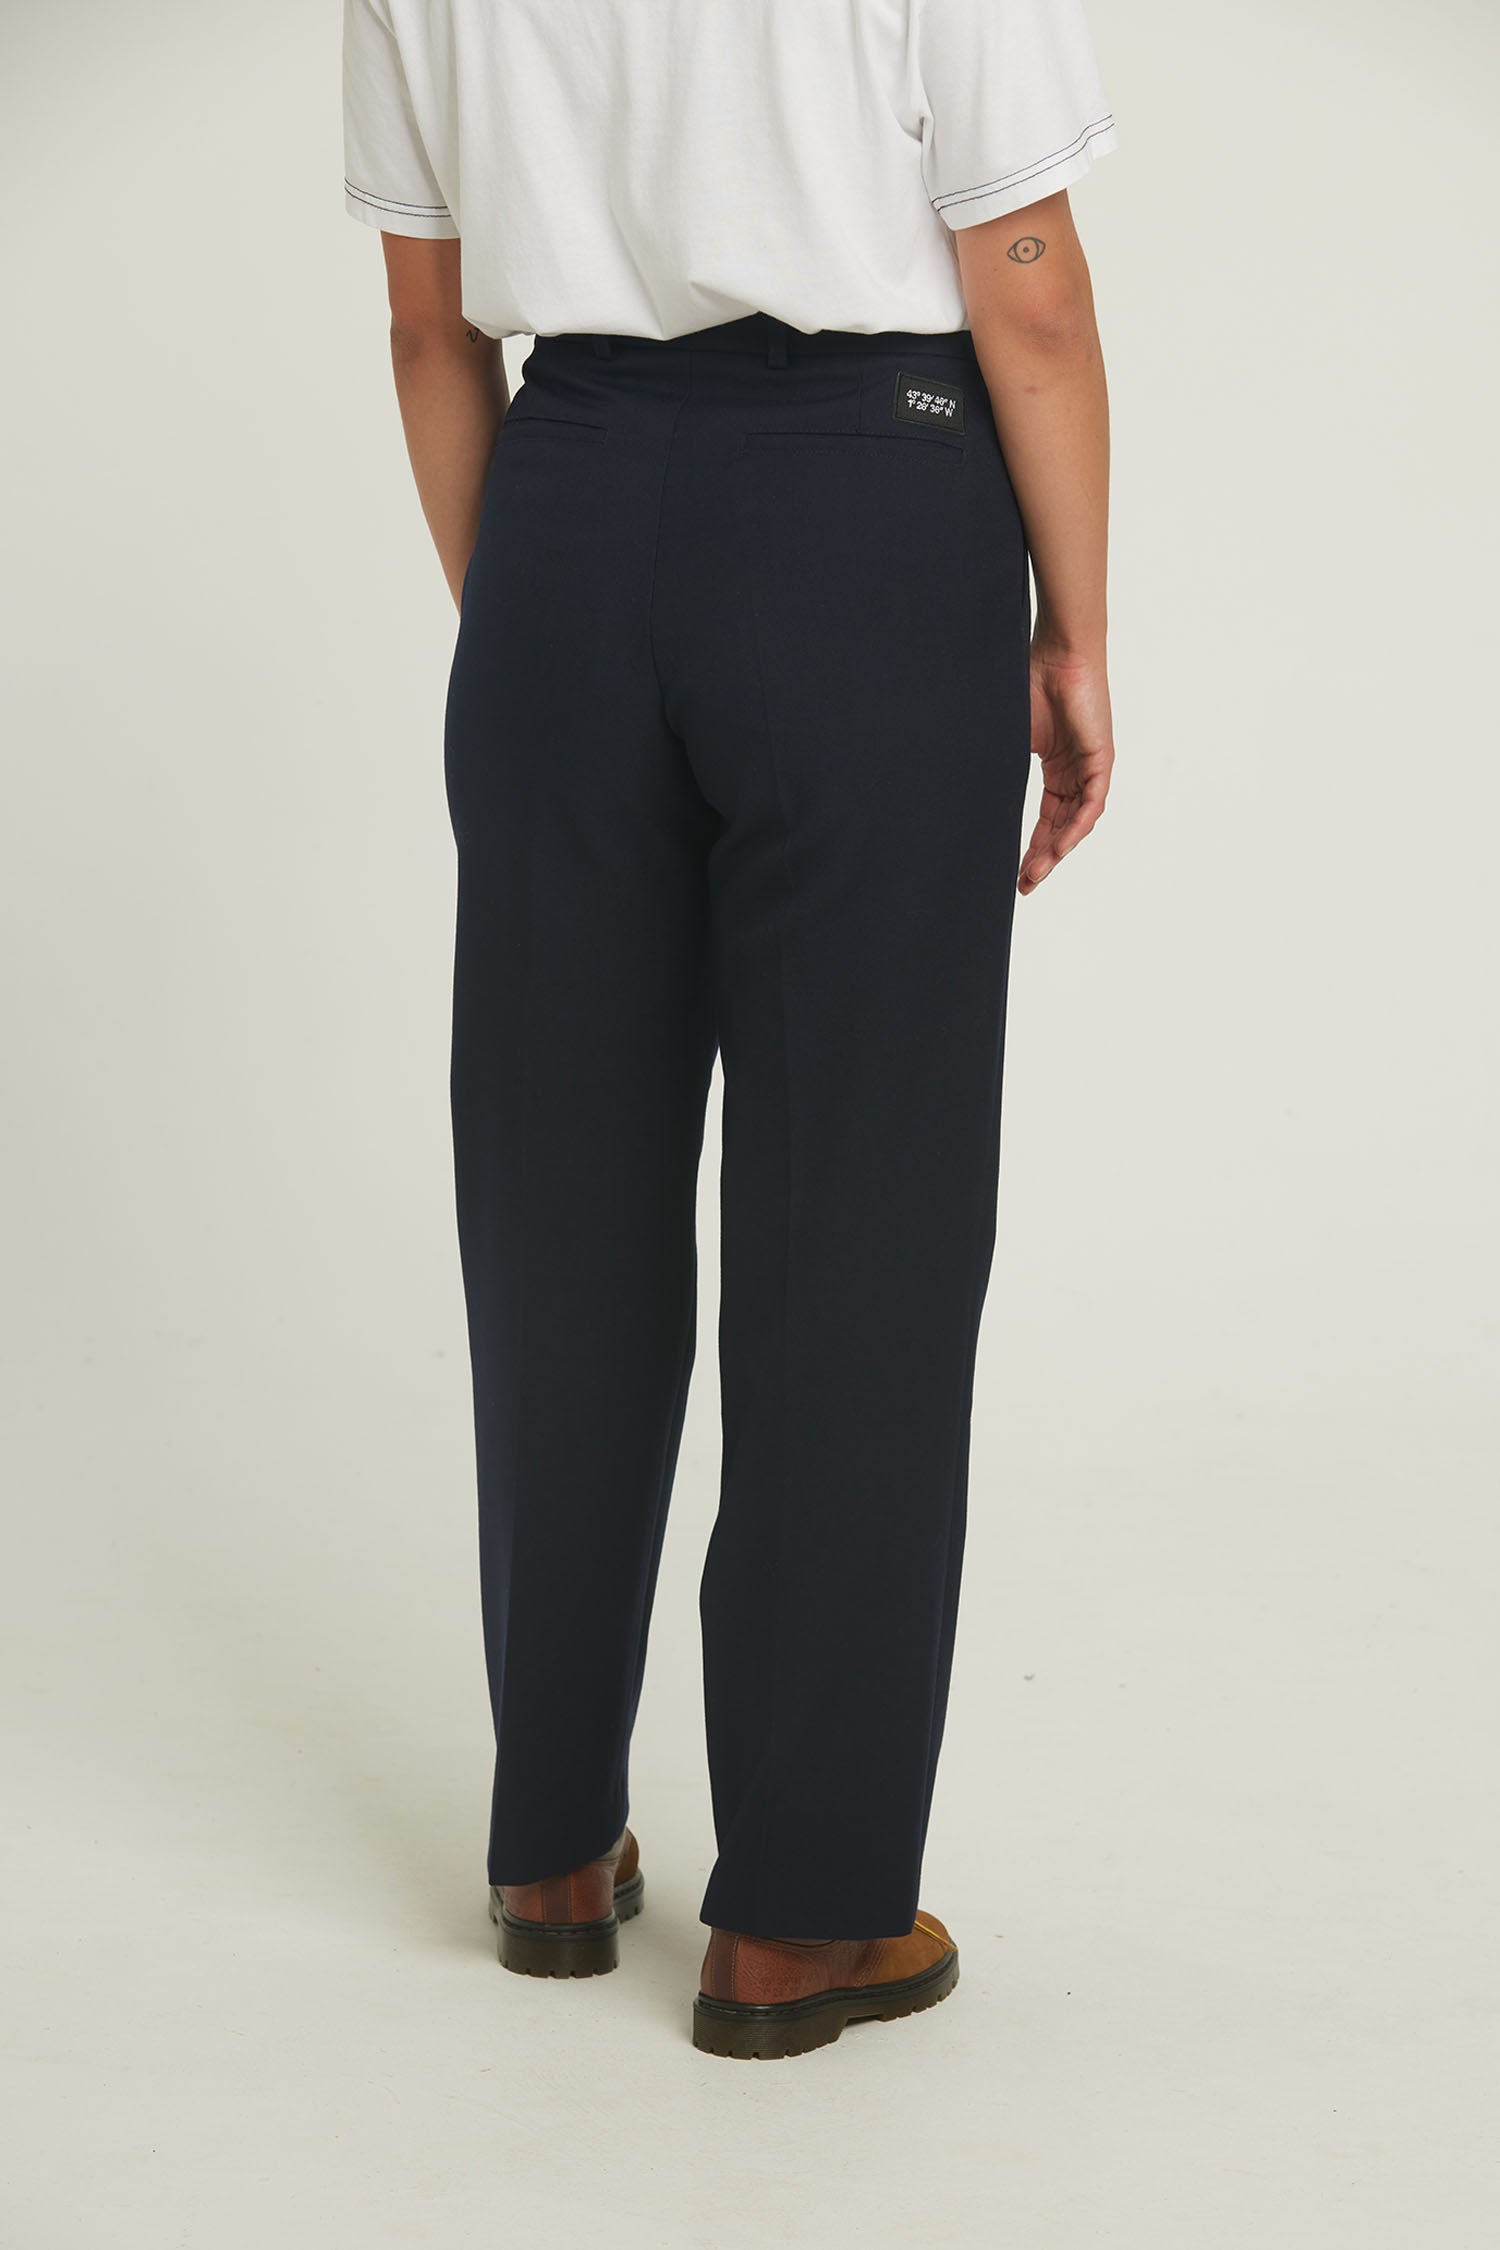 Officer" straight pant - Navy blue